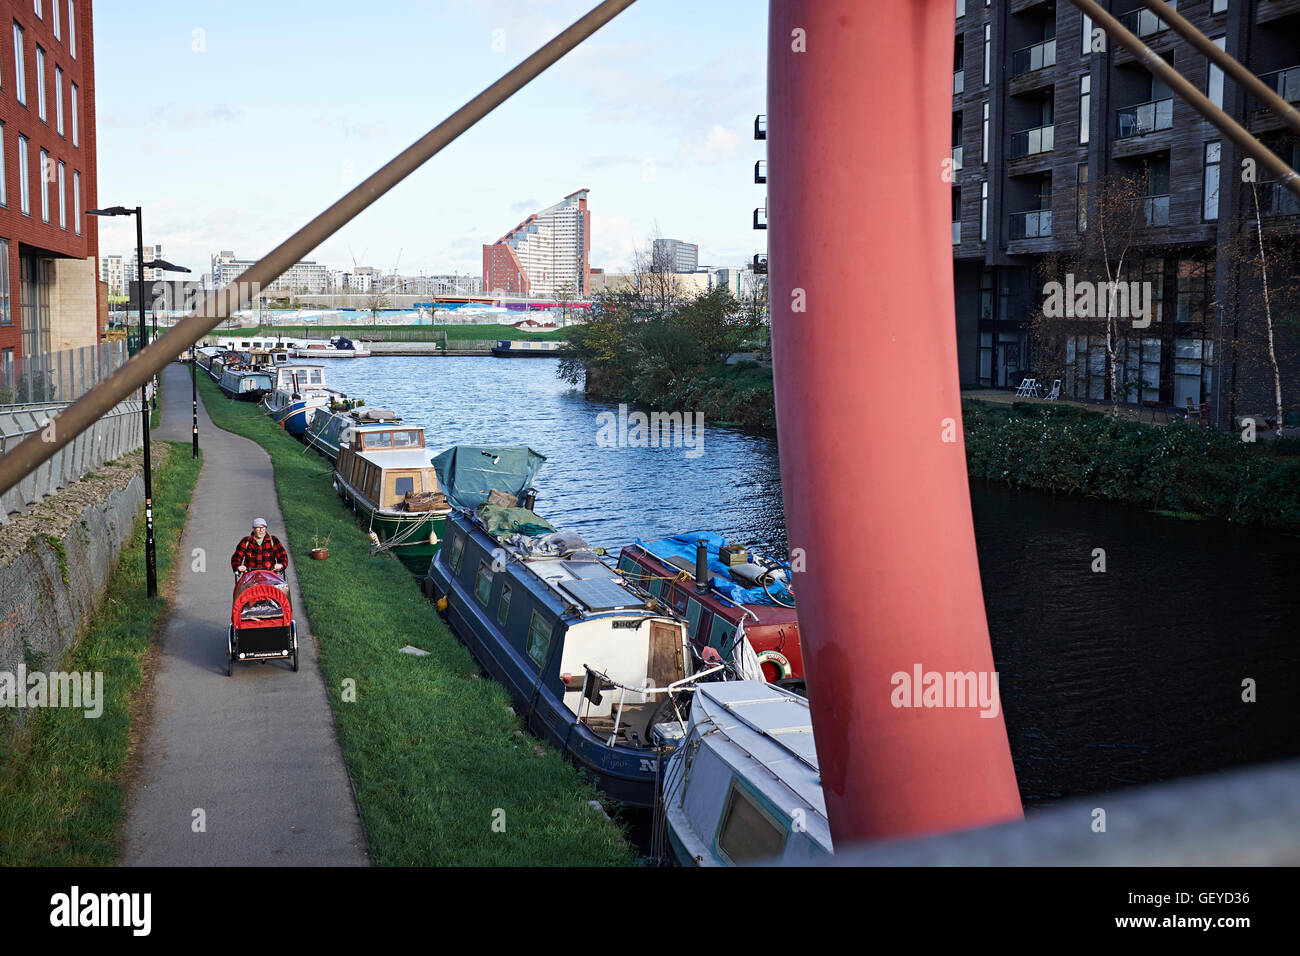 The areas surrounding the Olympic park in the Hackney Wick and Stratford areas, Tower Hamlets, UK. Stock Photo